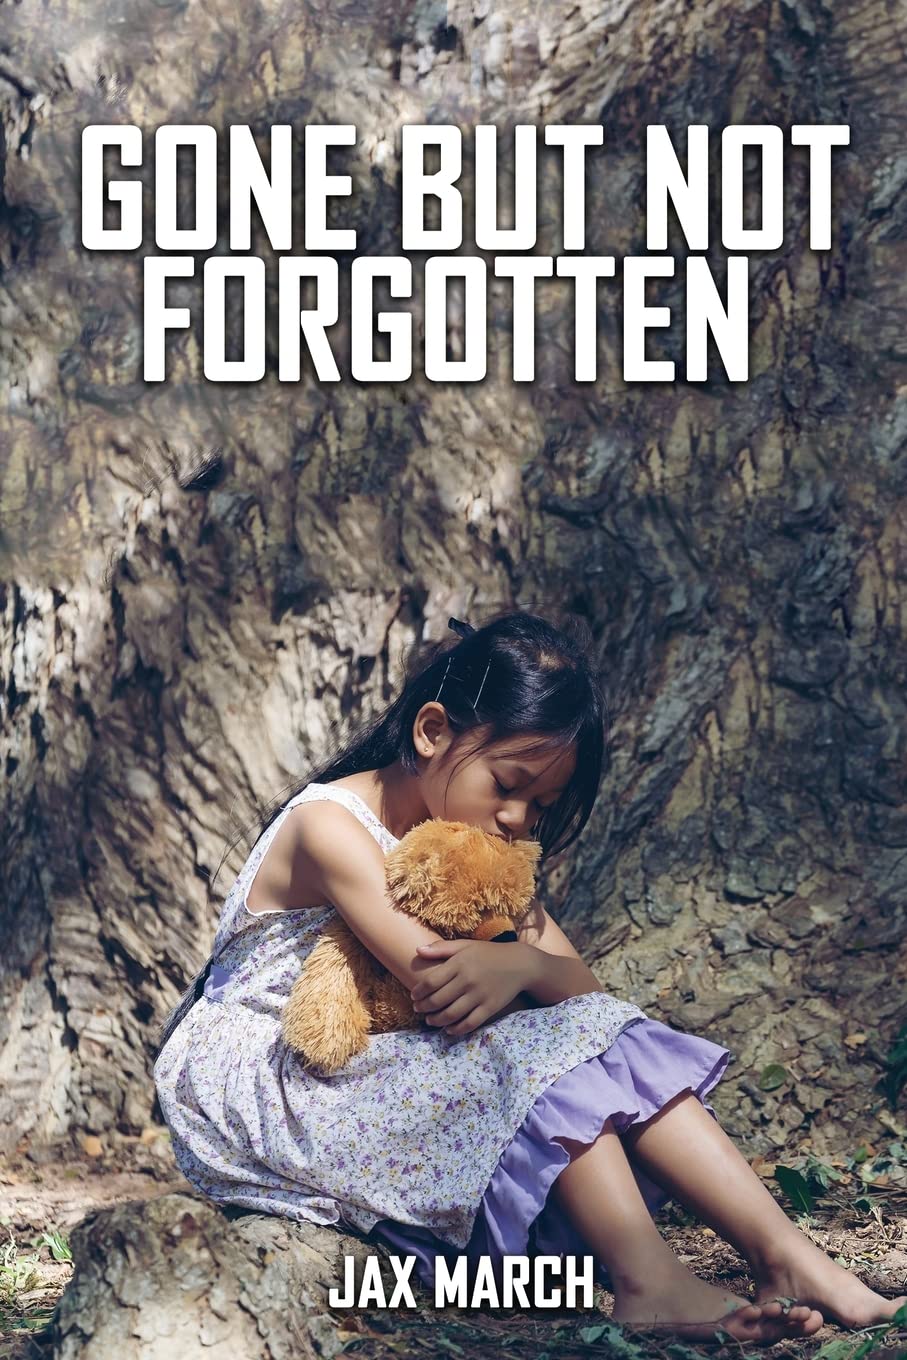 Author's Tranquility Press presents: "Gone but Not Forgotten" A poignant and powerful exploration of loss and grief